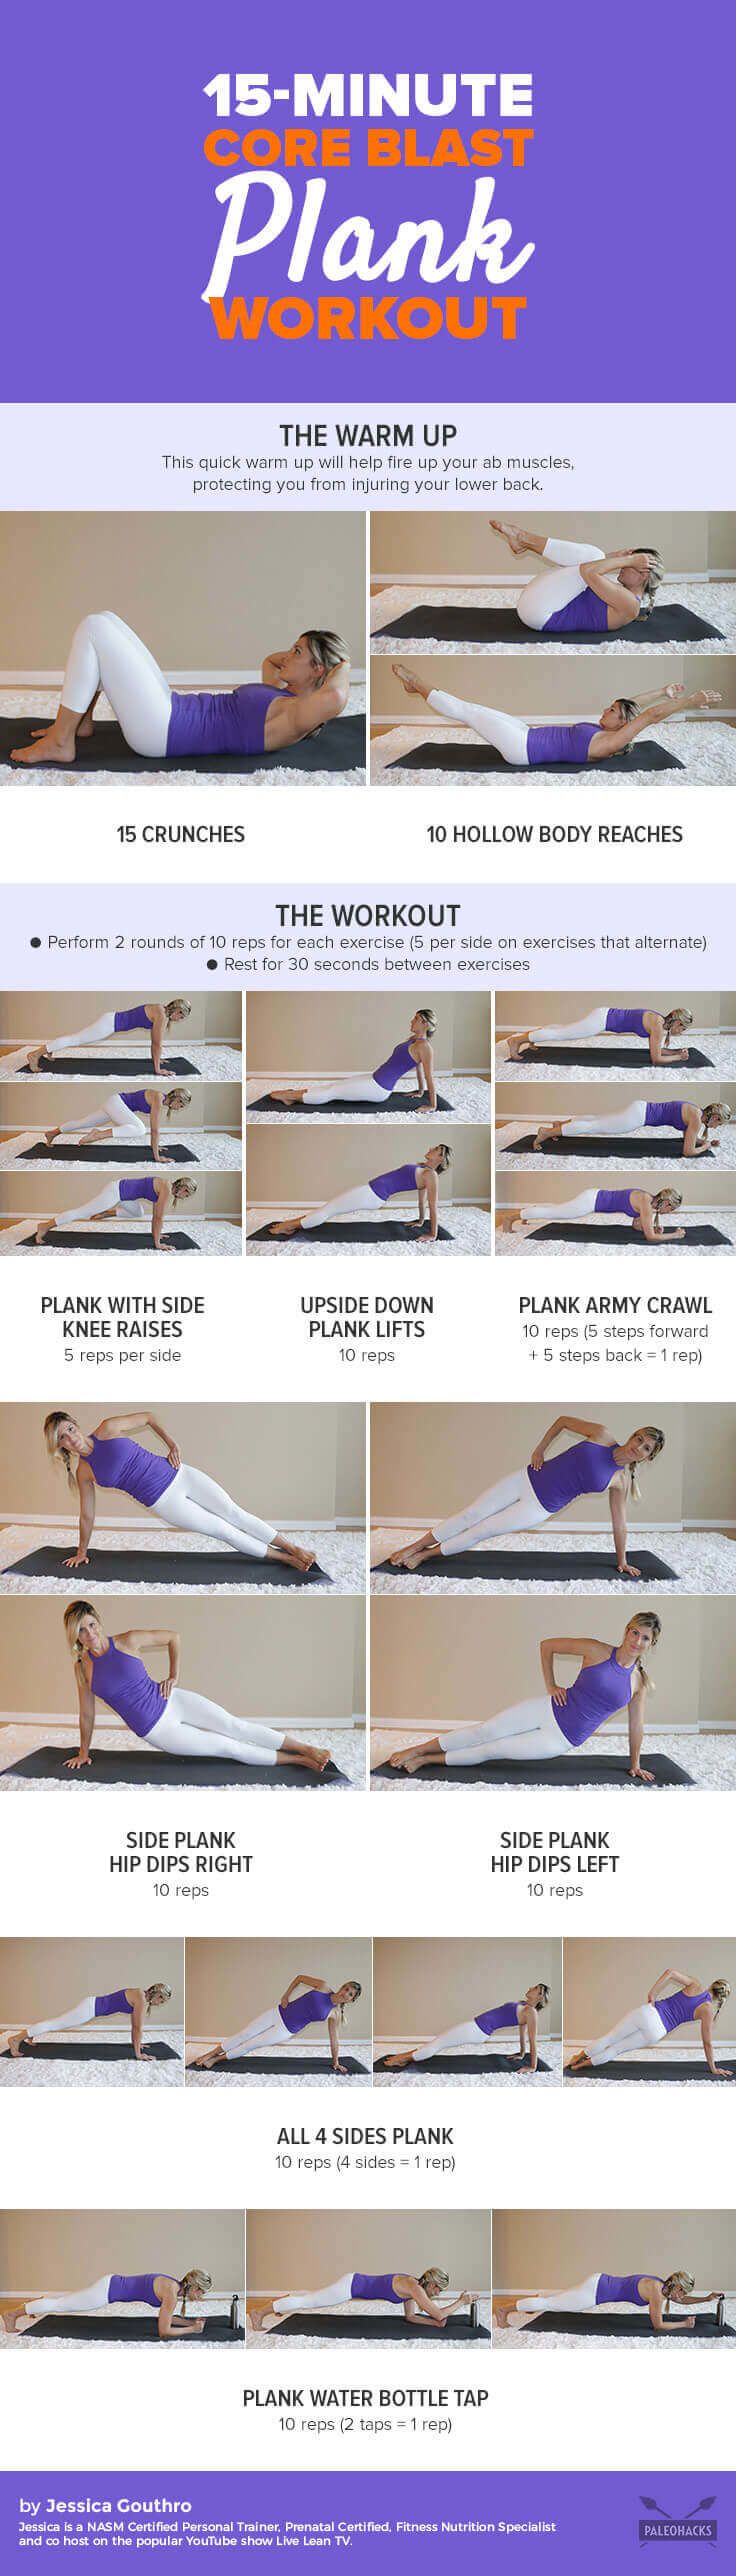 core blast plank workout infographic